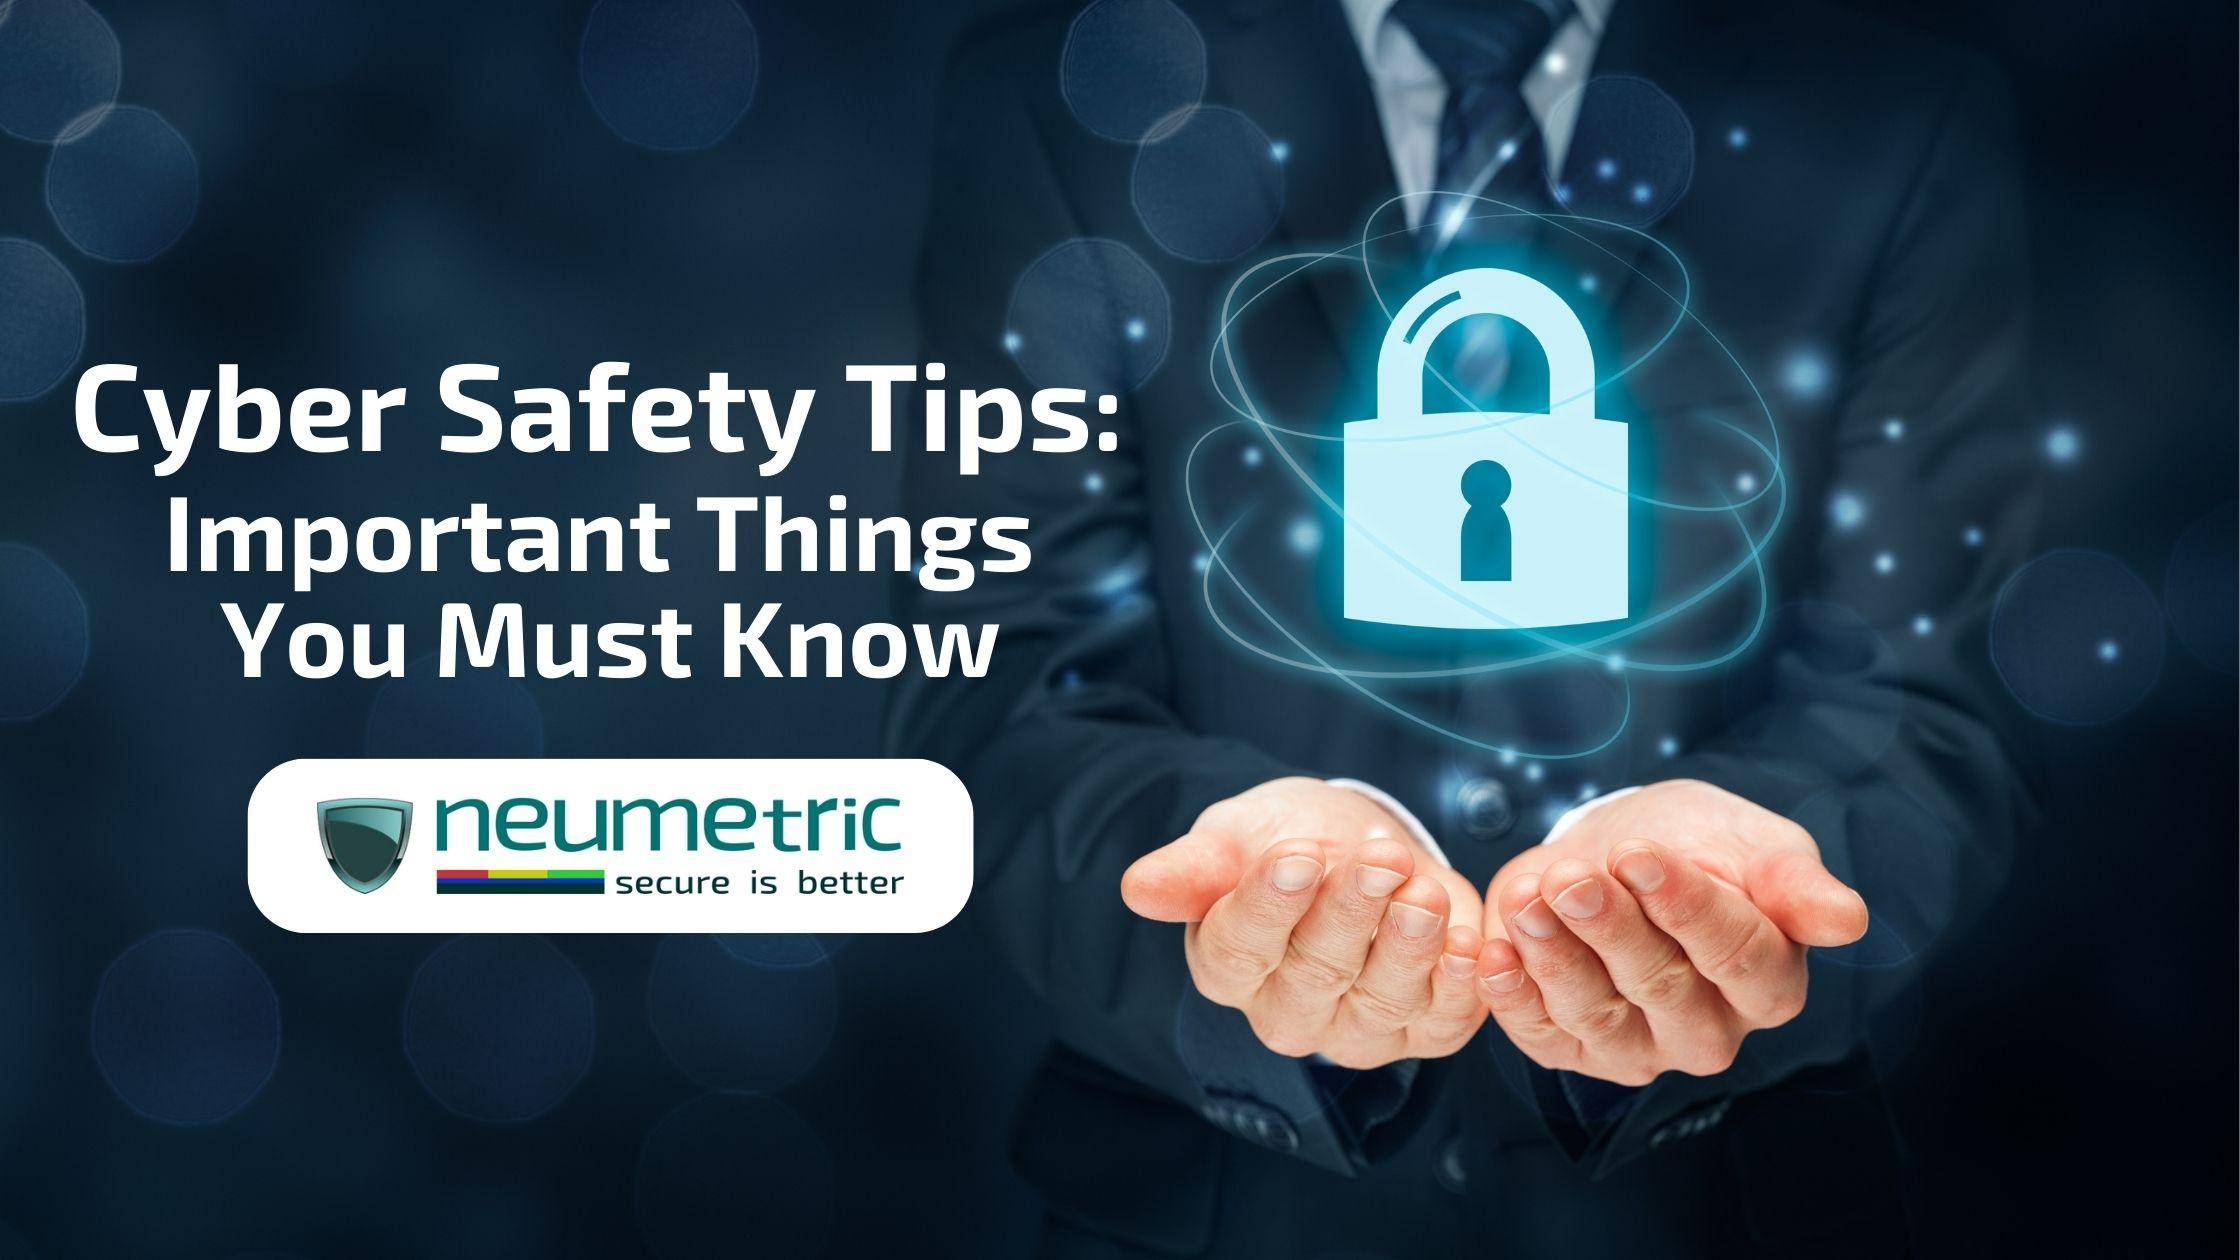 10 Essential Cybersecurity Tips Every Internet User Should Know - Conclusion